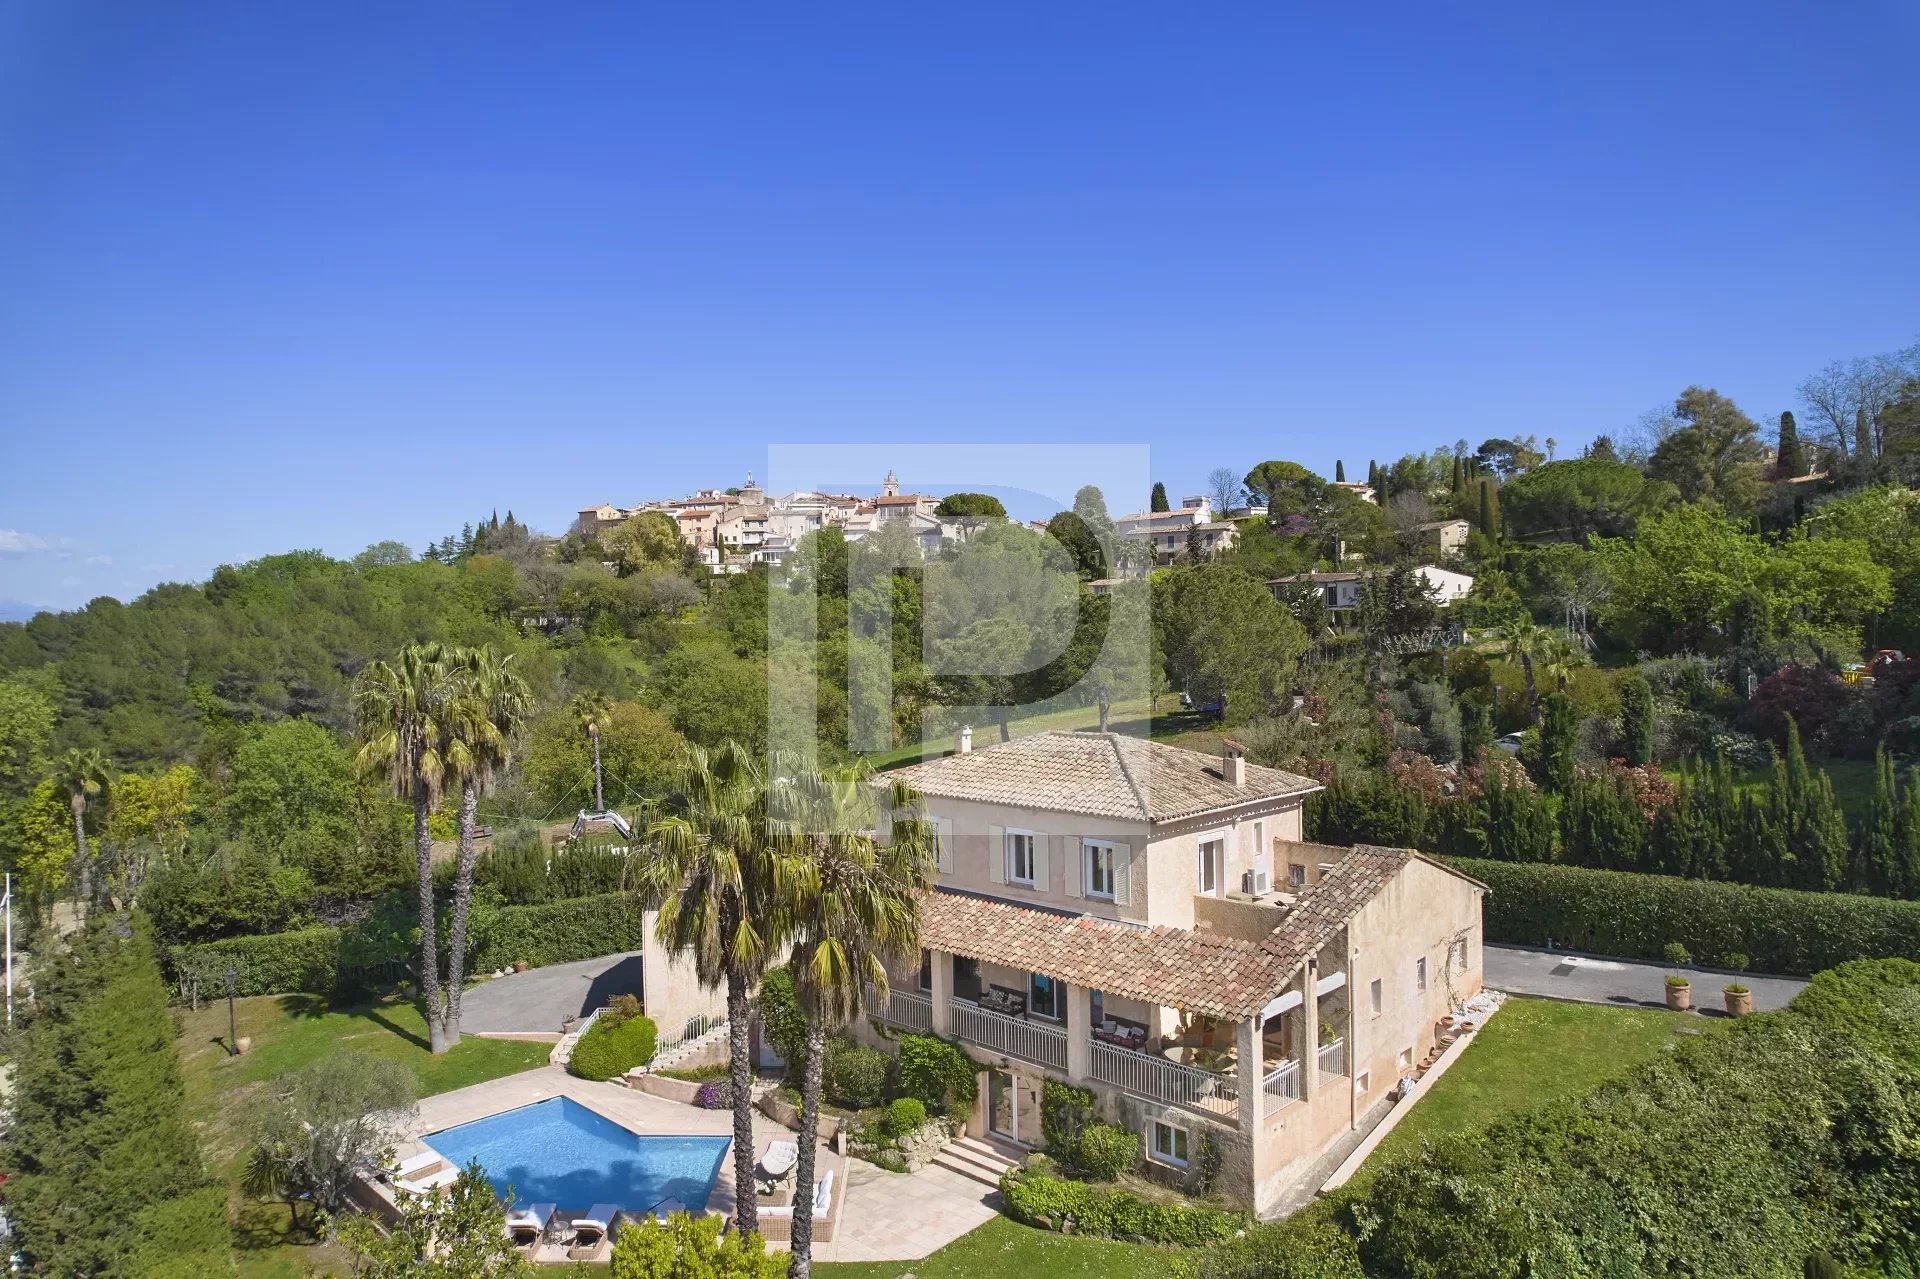 -JOINTAGENT- Very rare - Mougins Village - Charming property with panoramic views